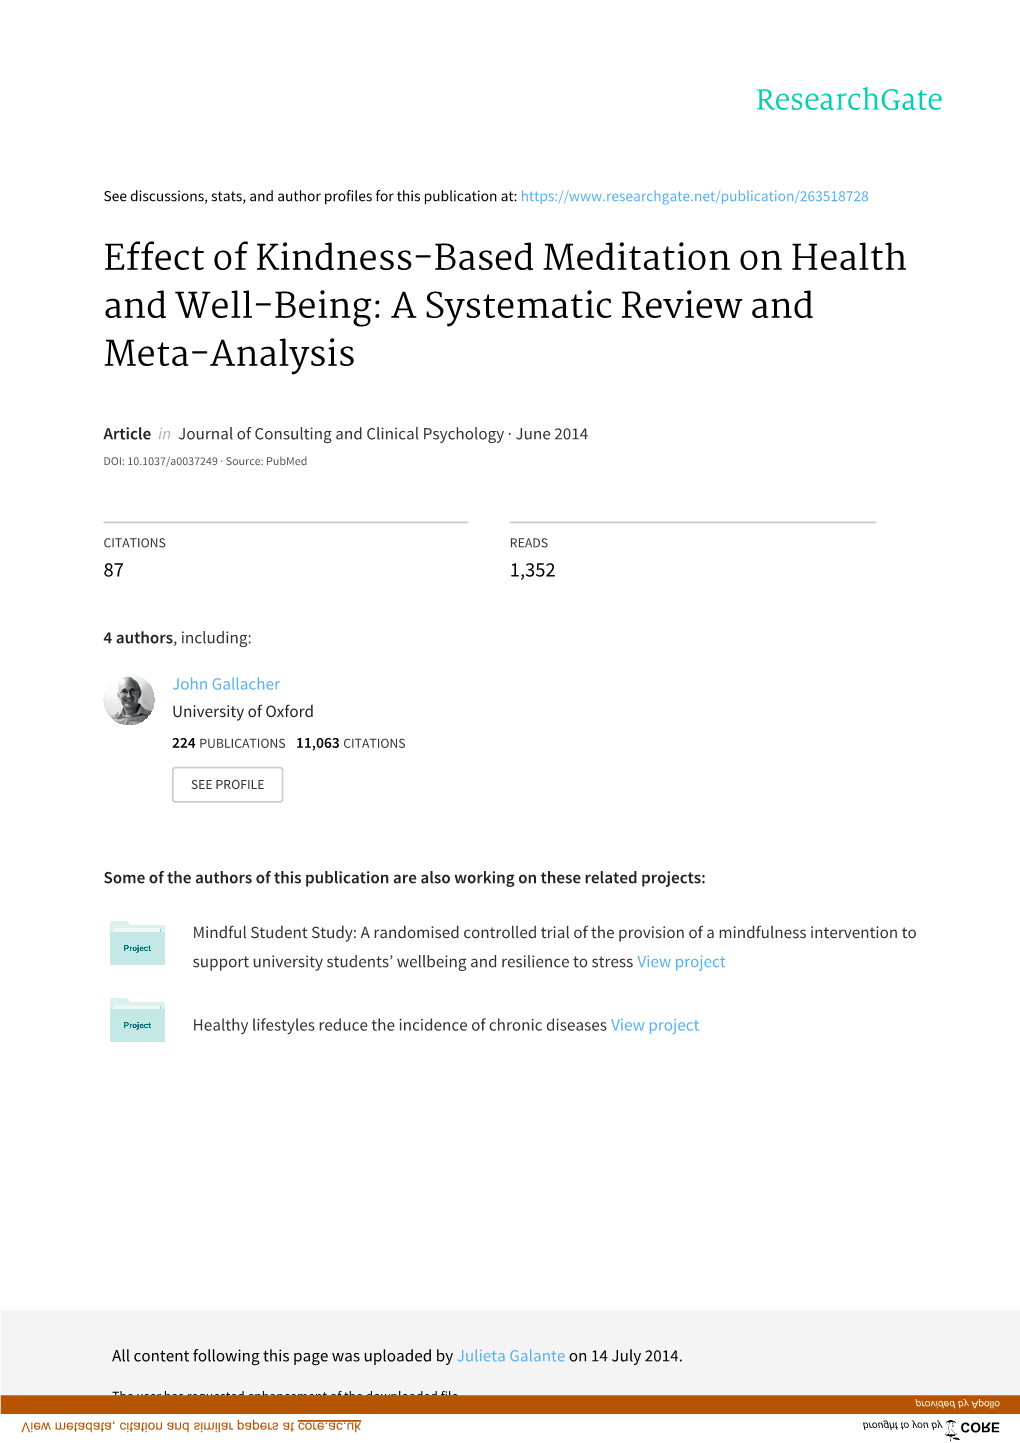 Effect of Kindness-Based Meditation on Health and Well-Being: a Systematic Review and Meta-Analysis